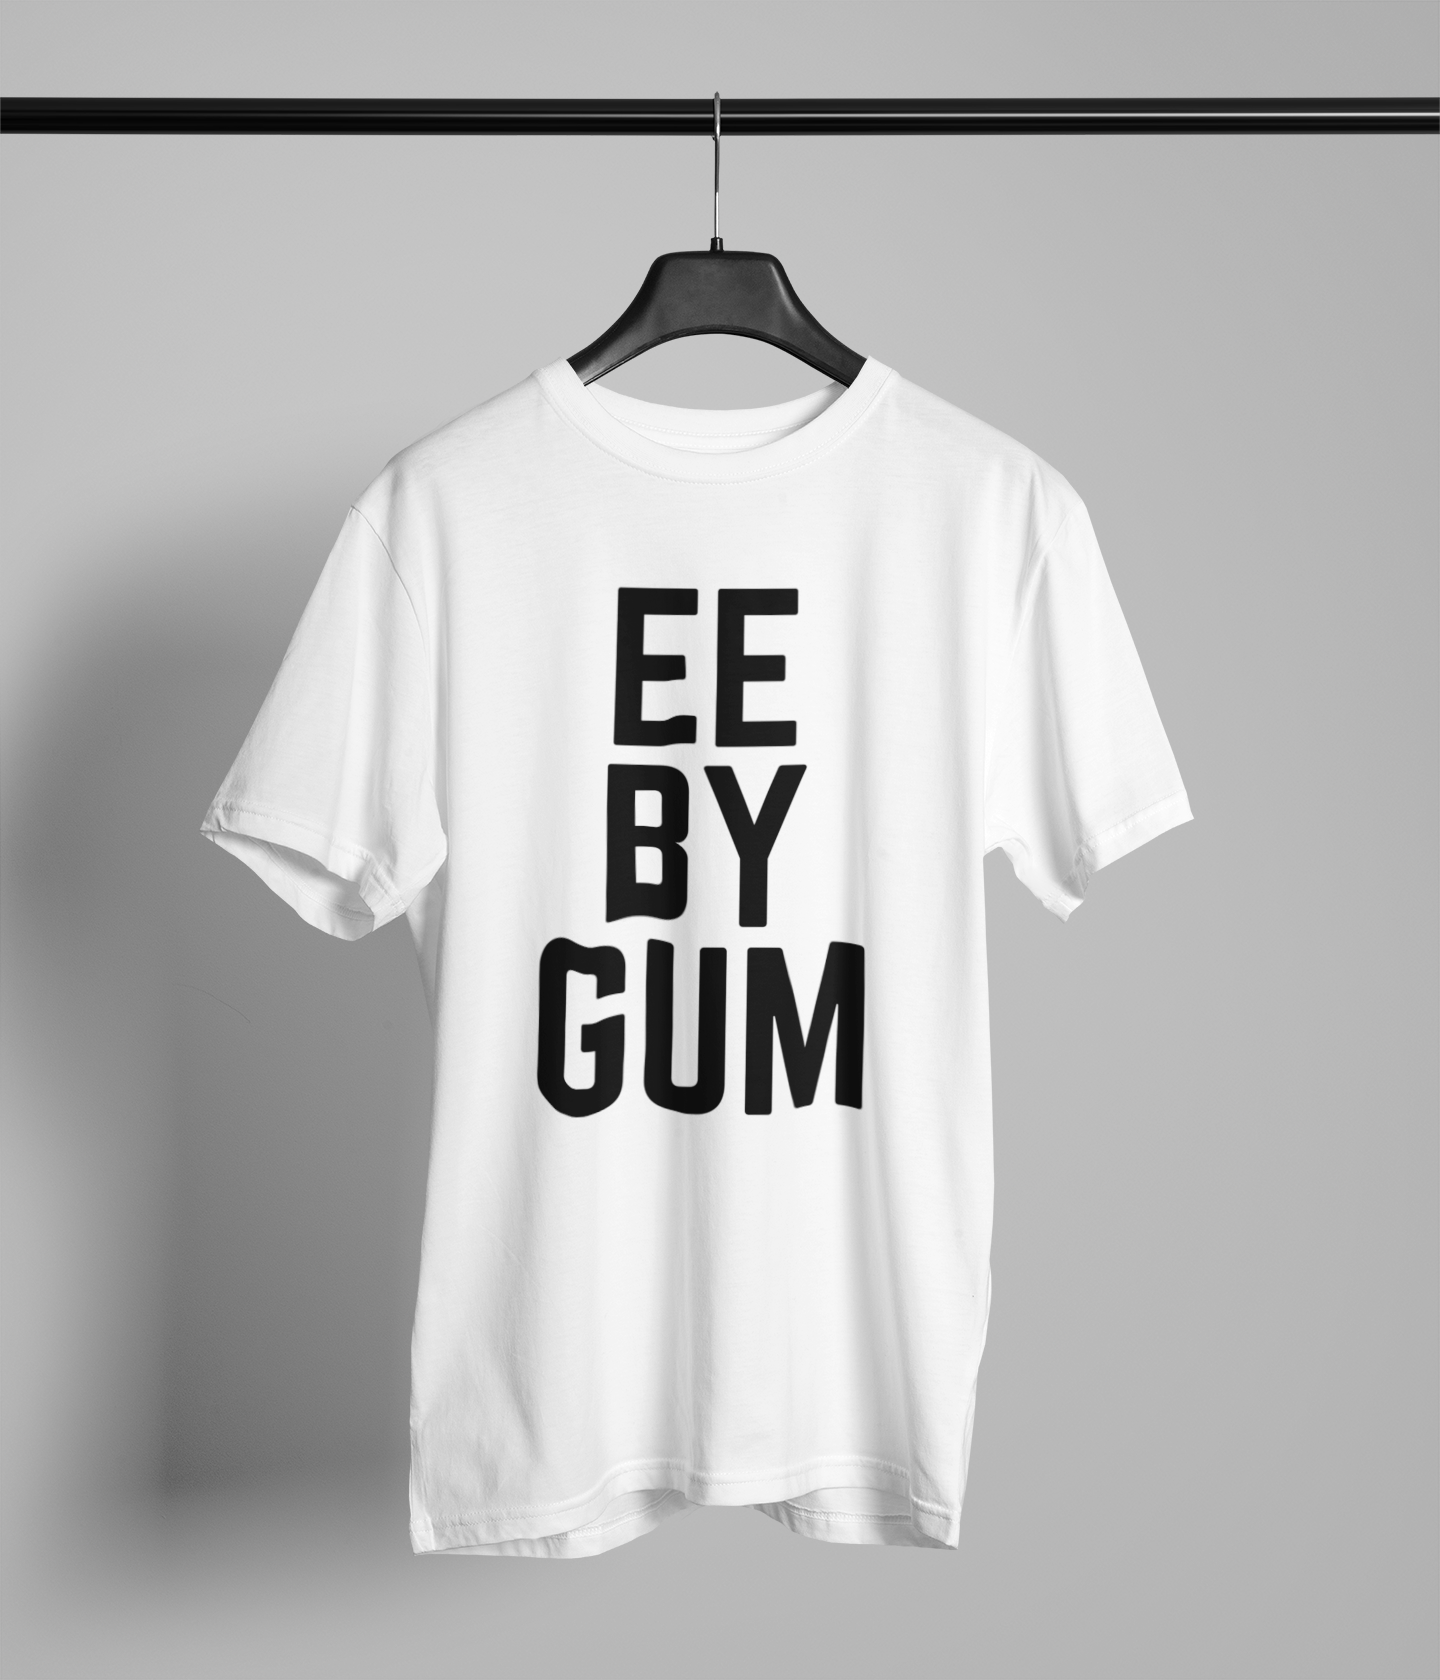 EE BY GUM Northern Slang T-Shirt